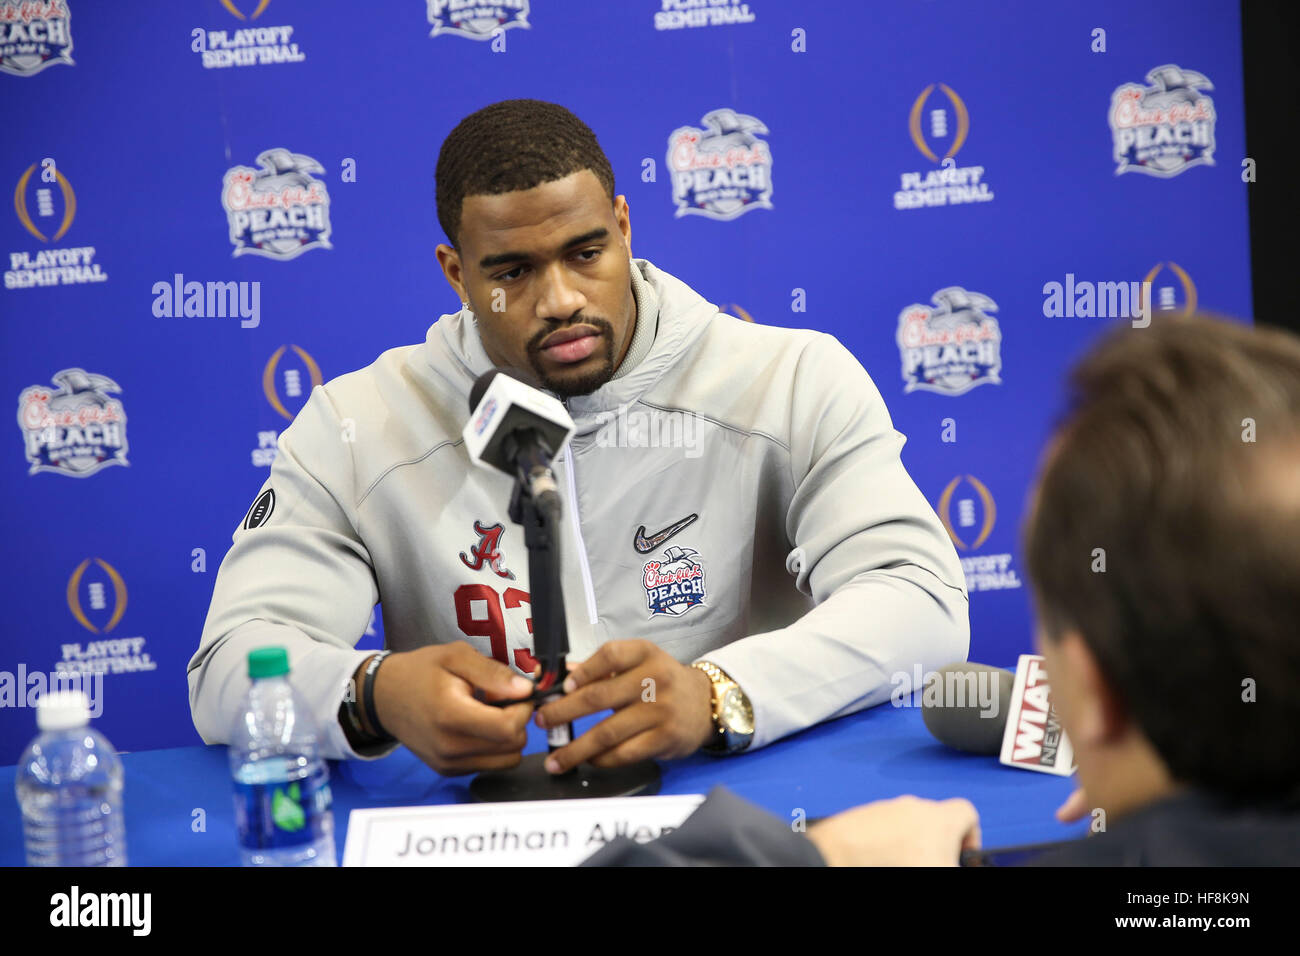 Atlanta, Florida, USA. 29th Dec, 2016. MONICA HERNDON | Times.Alabama Crimson Tide defensive lineman Jonathan Allen (93) answers questions from reporters during Alabama Media Day for the Chick Fil A Peach Bowl College Football semifinal on Thursday December 29, 2016 at the Georgia Dome, in Atlanta, Georgia. © Monica Herndon/Tampa Bay Times/ZUMA Wire/Alamy Live News Stock Photo